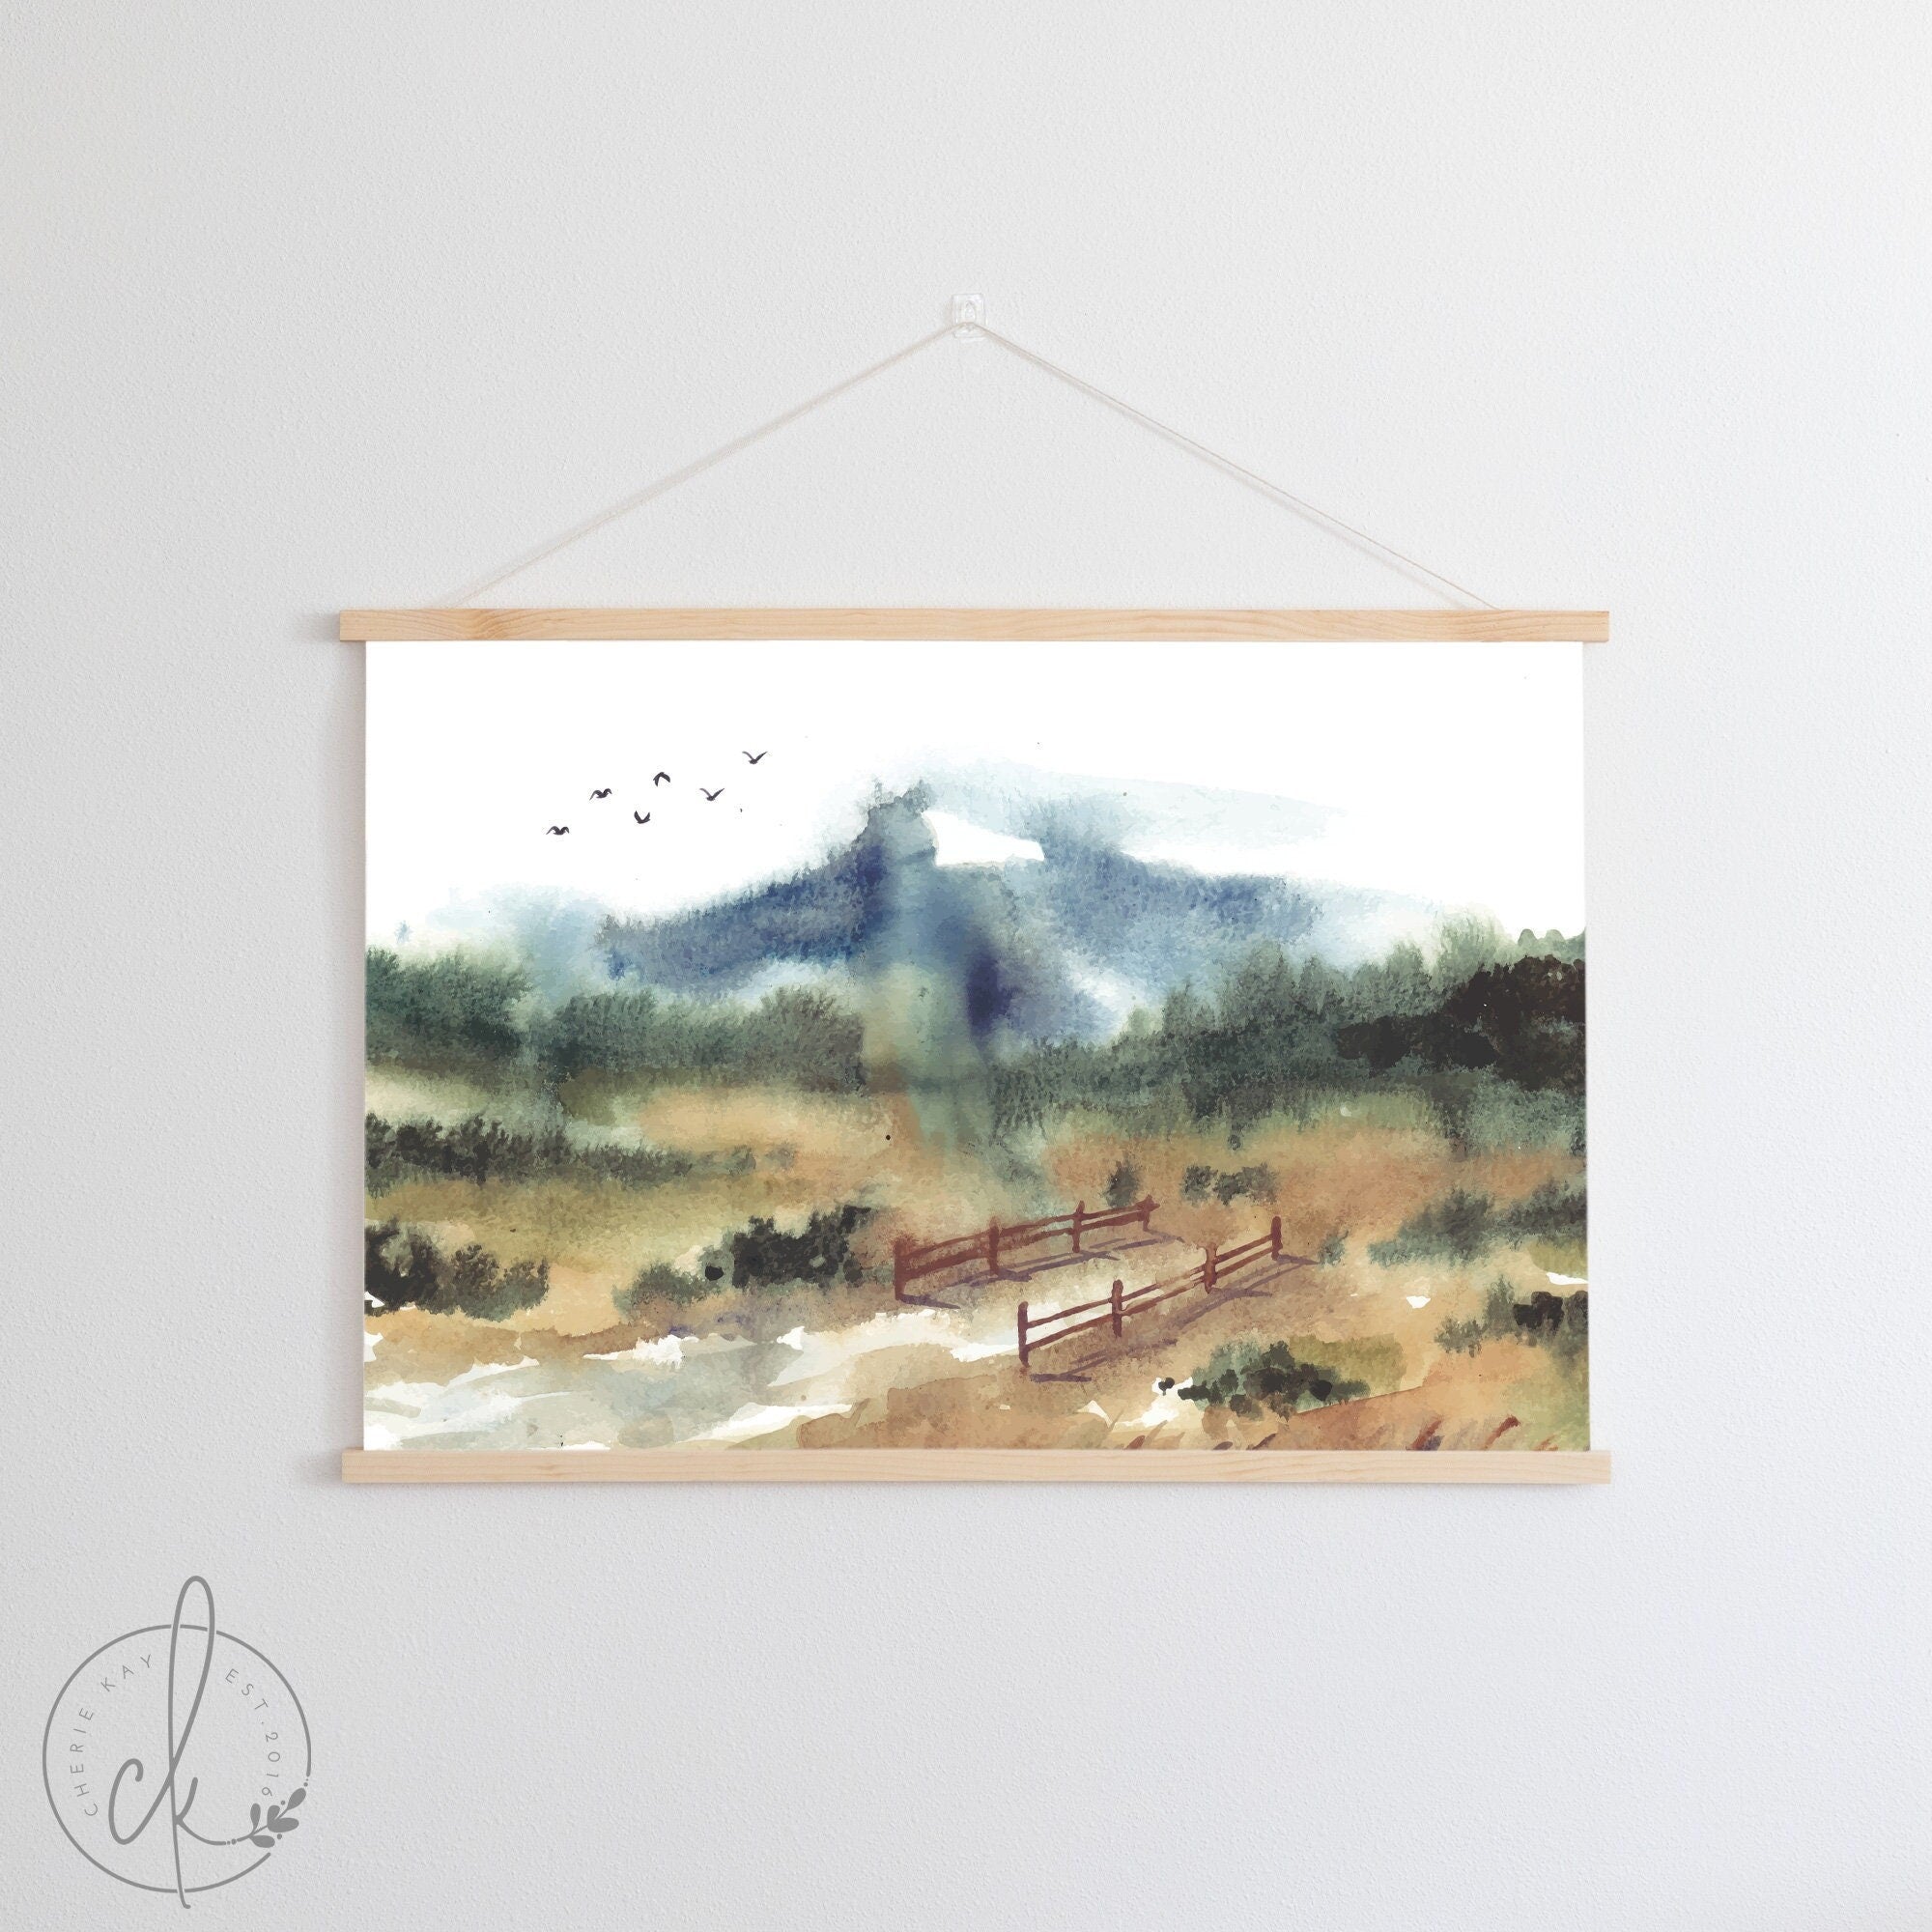 Landscape Wall Art | Fabric Wall Hanging | Mountain Landscape Wall Decor | Watercolor Painting | Peaceful Trail